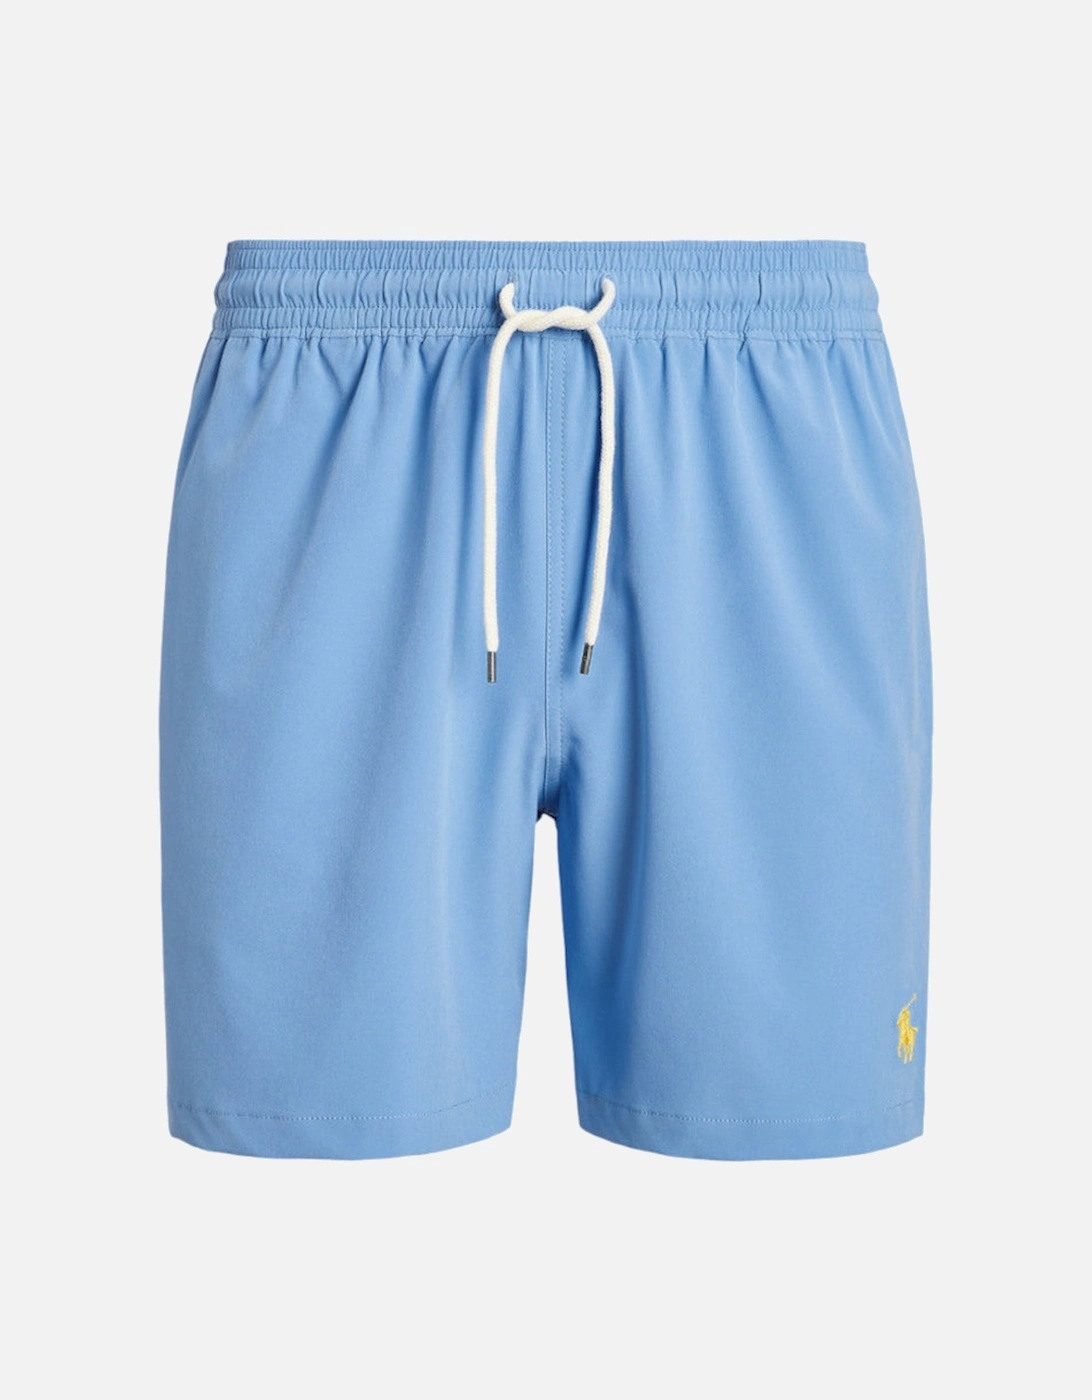 Swimshorts 001 Harbour Island Blue, 5 of 4